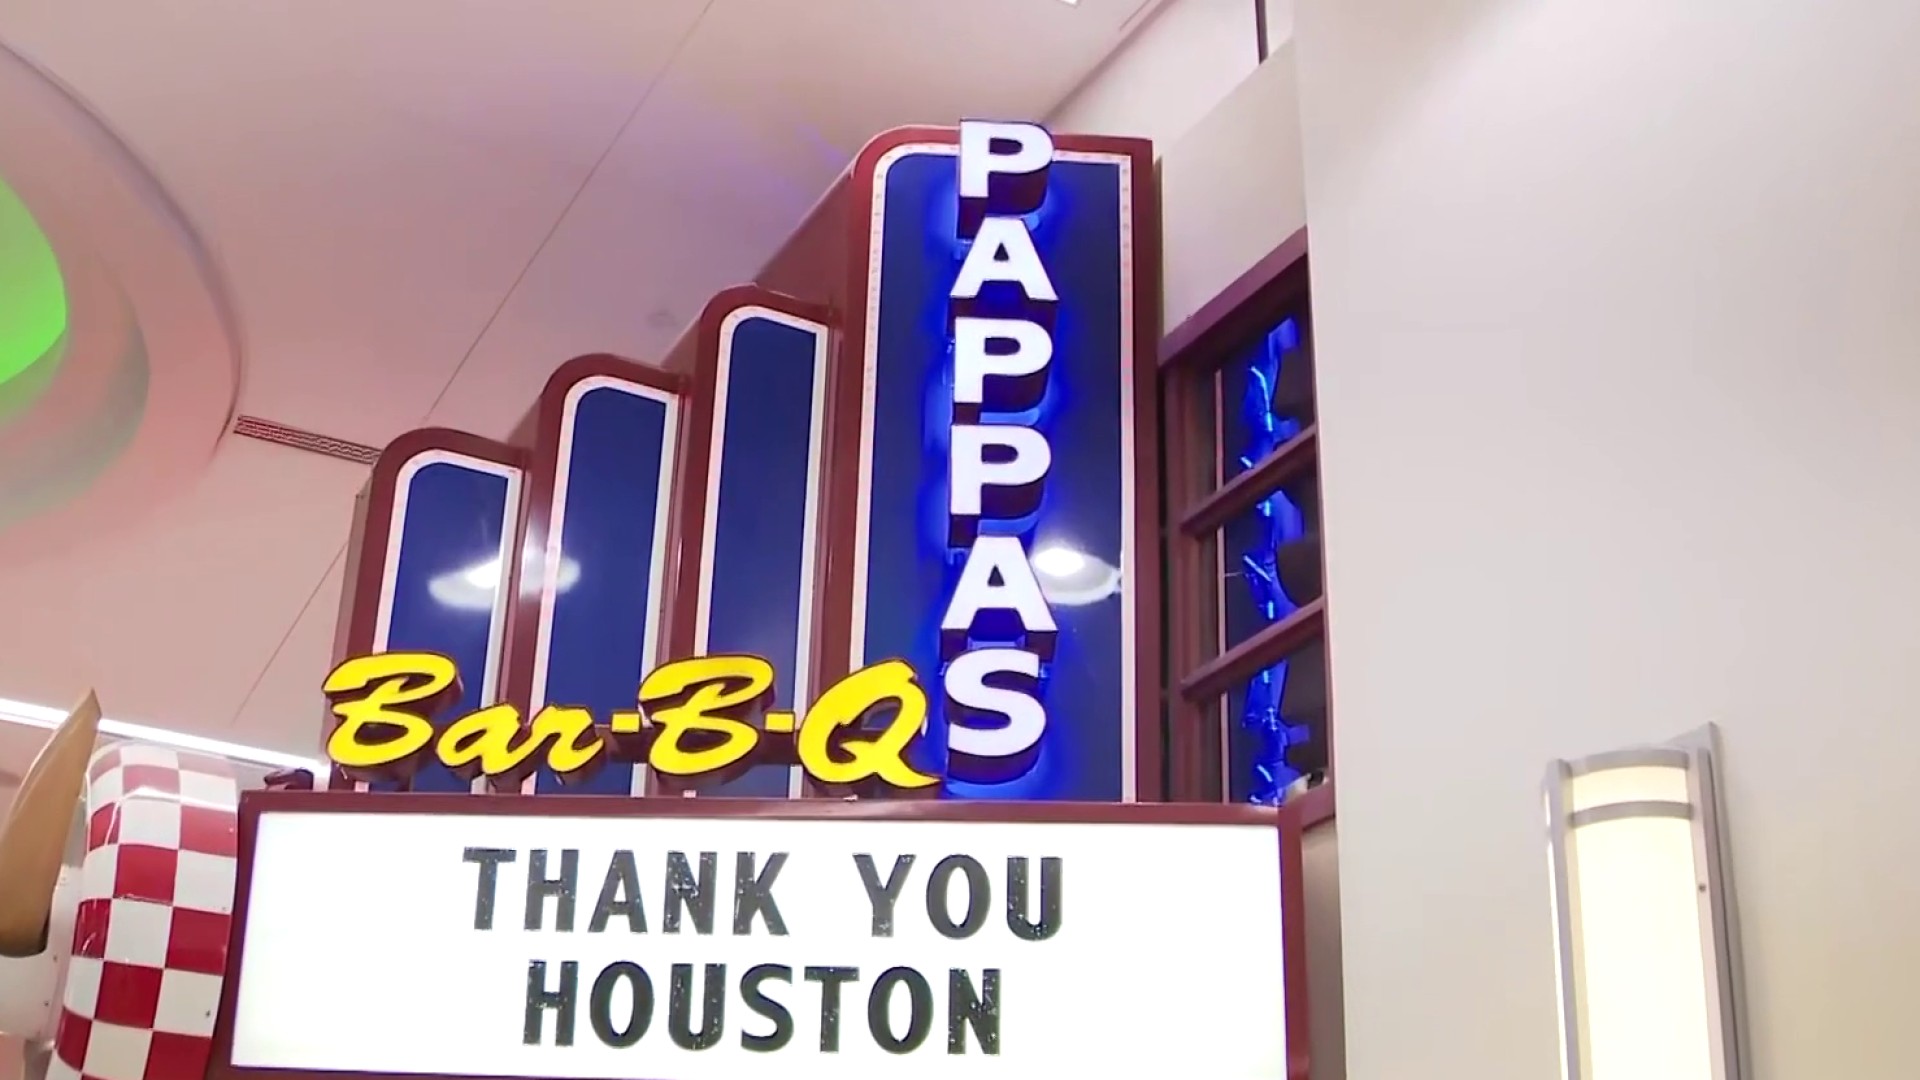 Hubcap Grill popup to take Pappas Burgers' spot in Hobby Airport